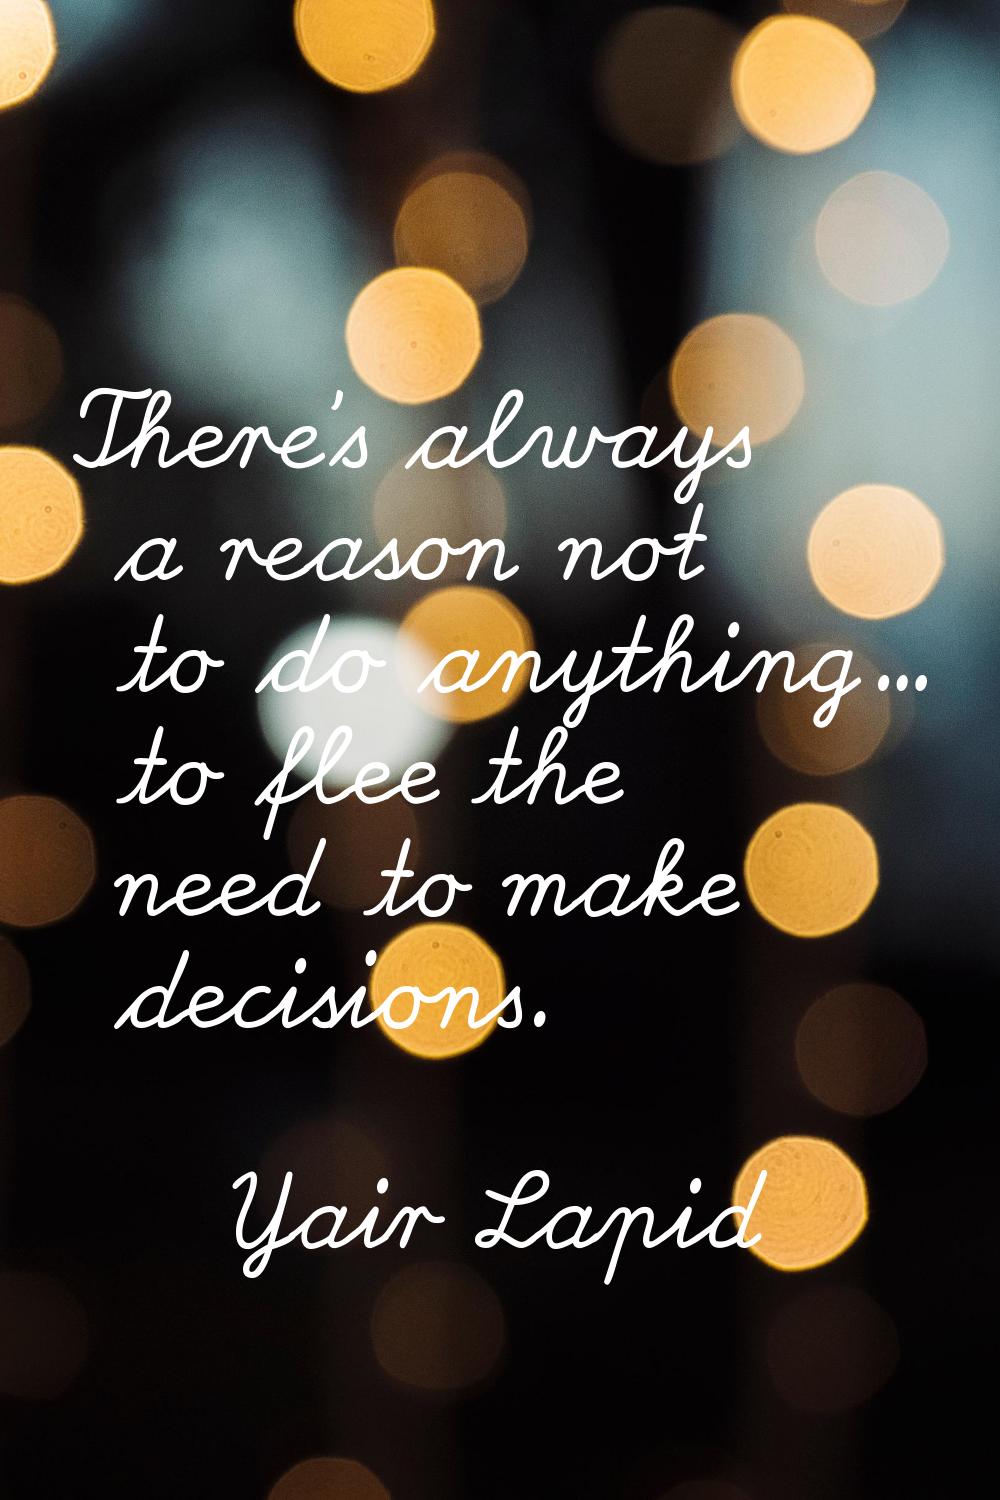 There's always a reason not to do anything... to flee the need to make decisions.